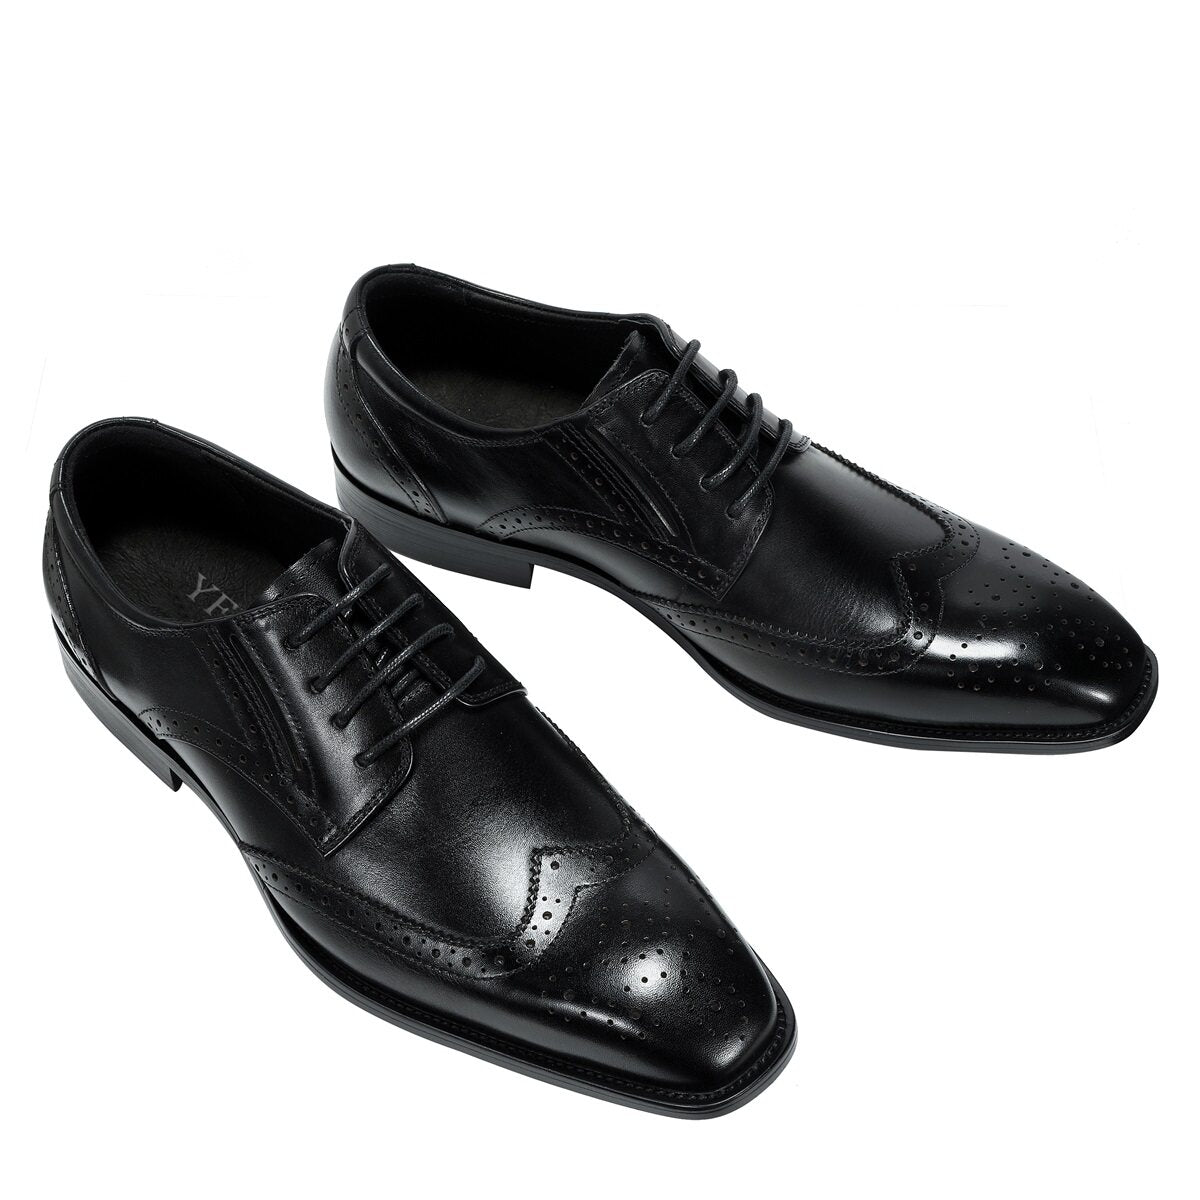 Men's Pointed Toe British Business Brogue Carved Leather Shoes Black